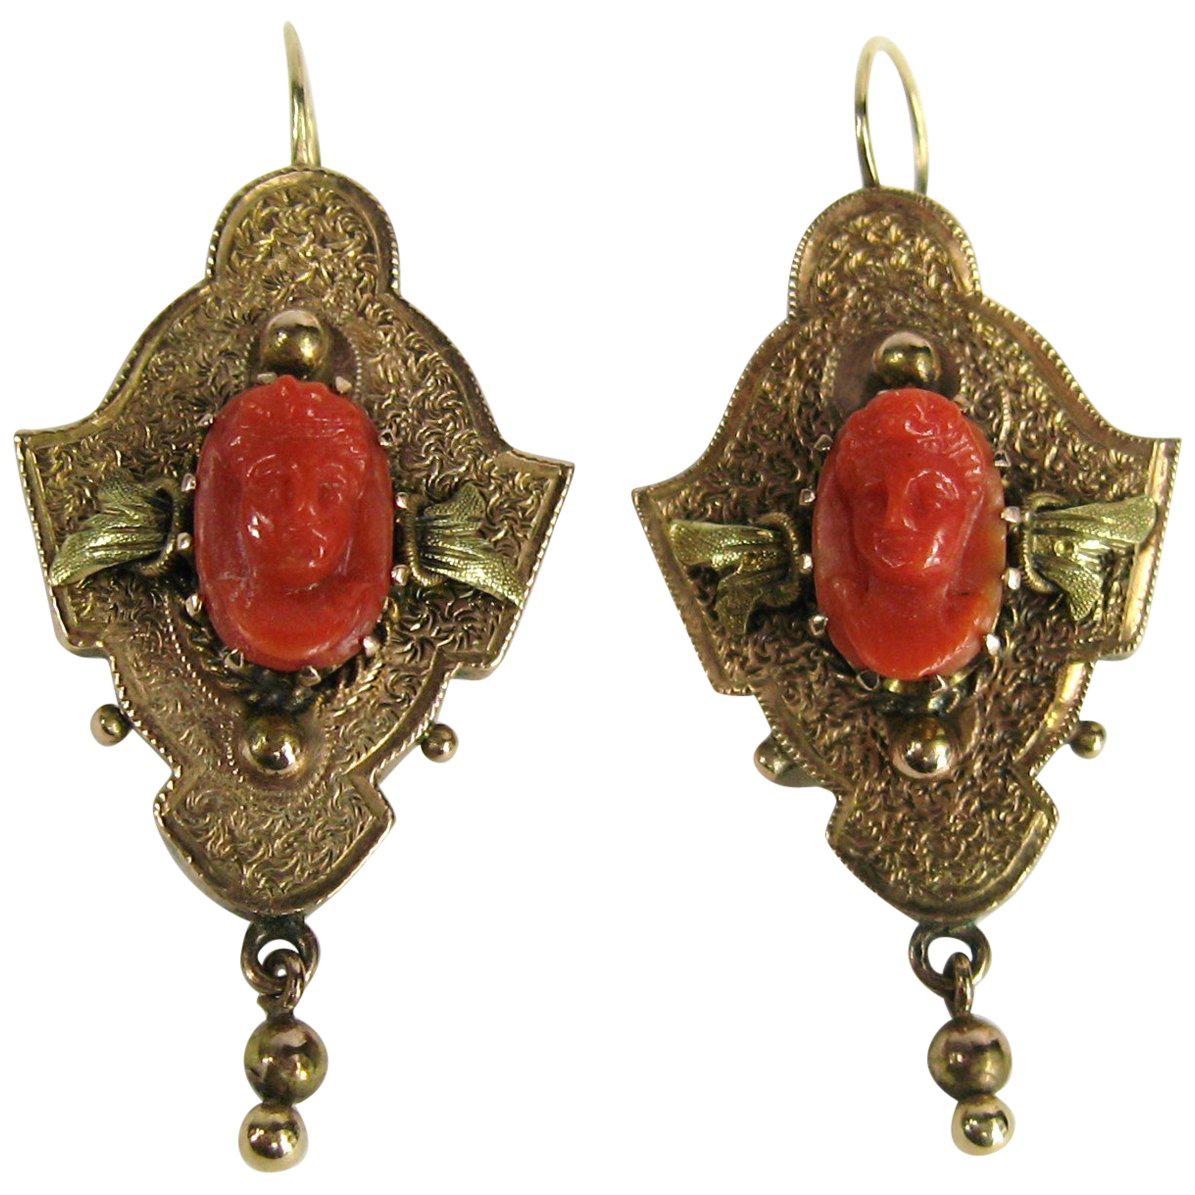 14 Karat Gold Coral Carved Antique Cameo Earrings